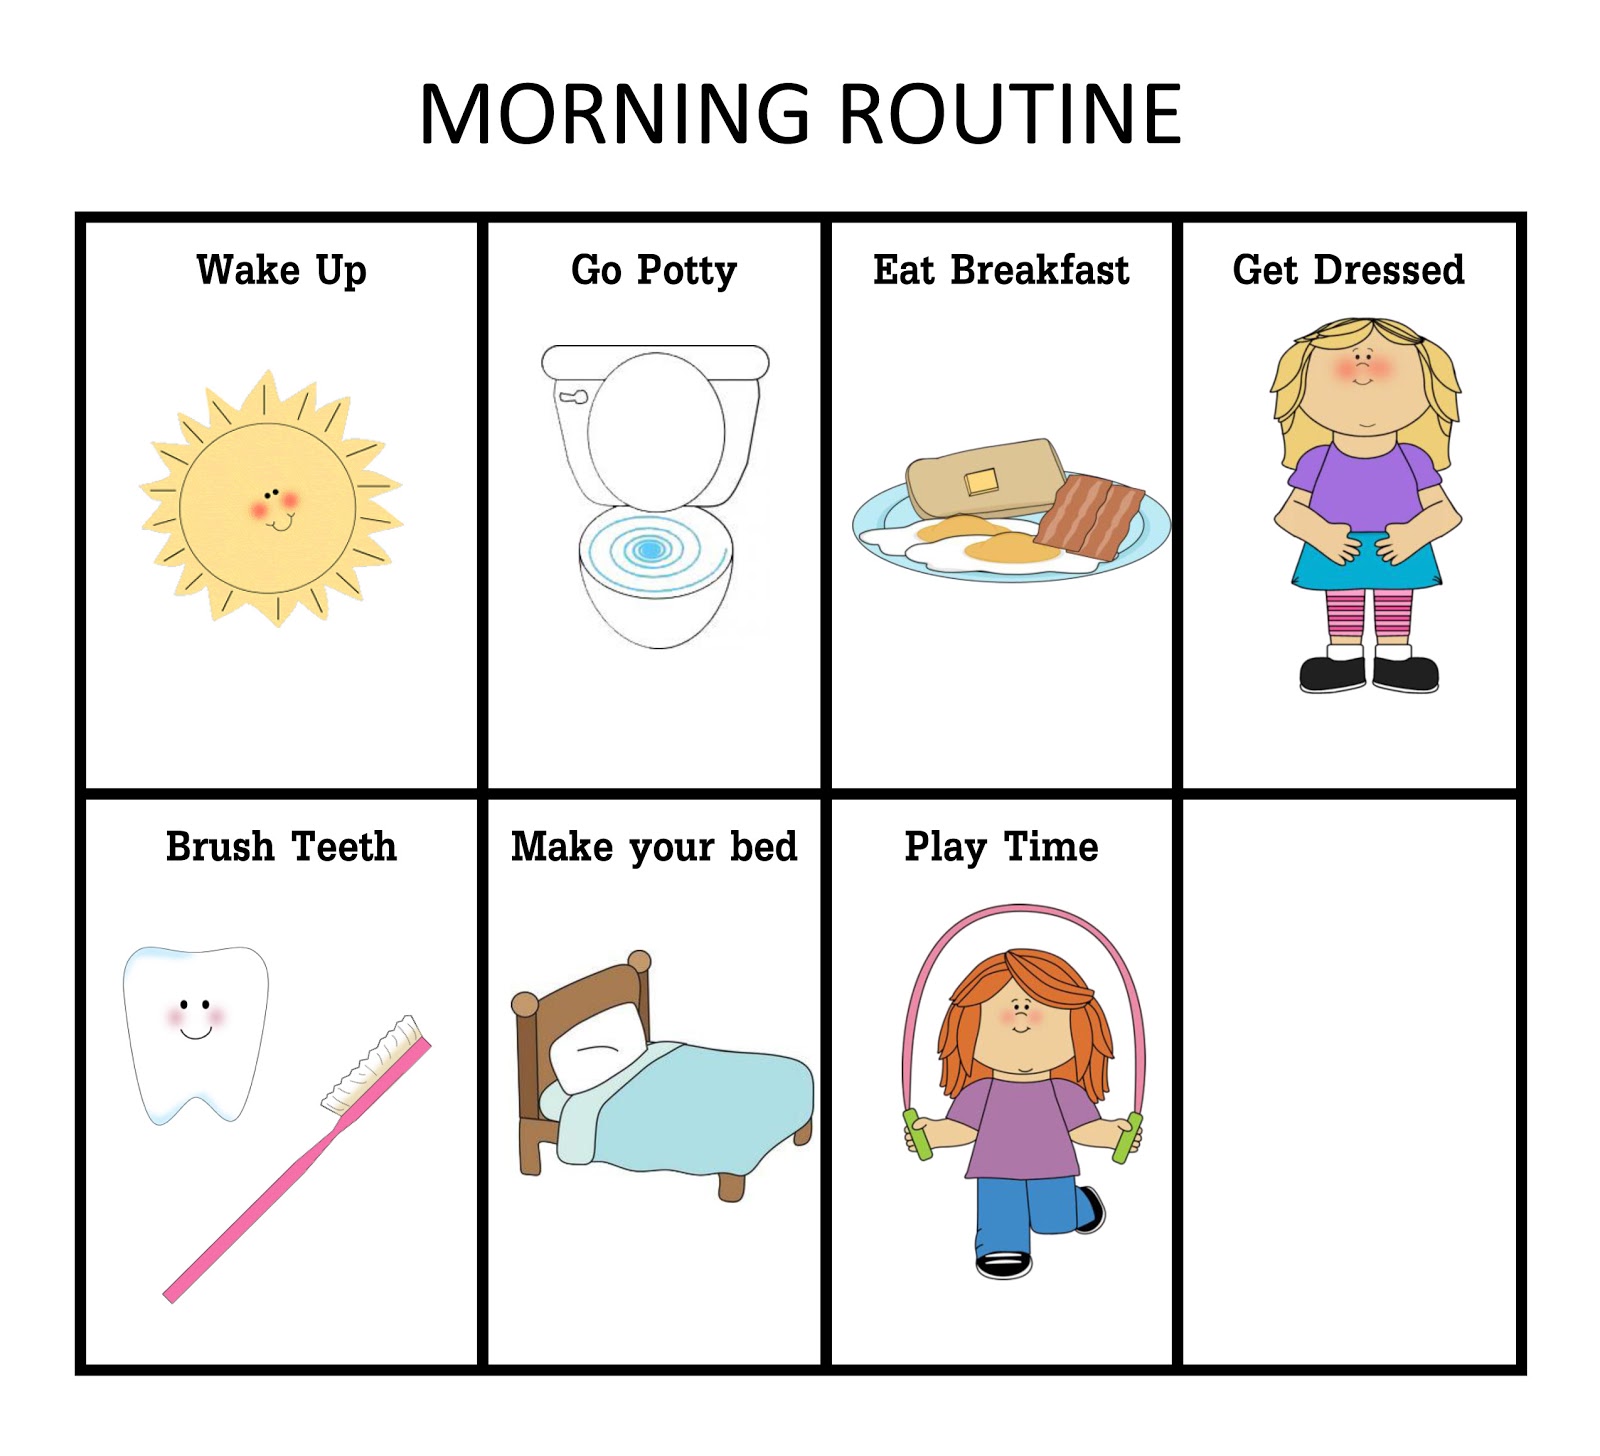 Morning routine clipart